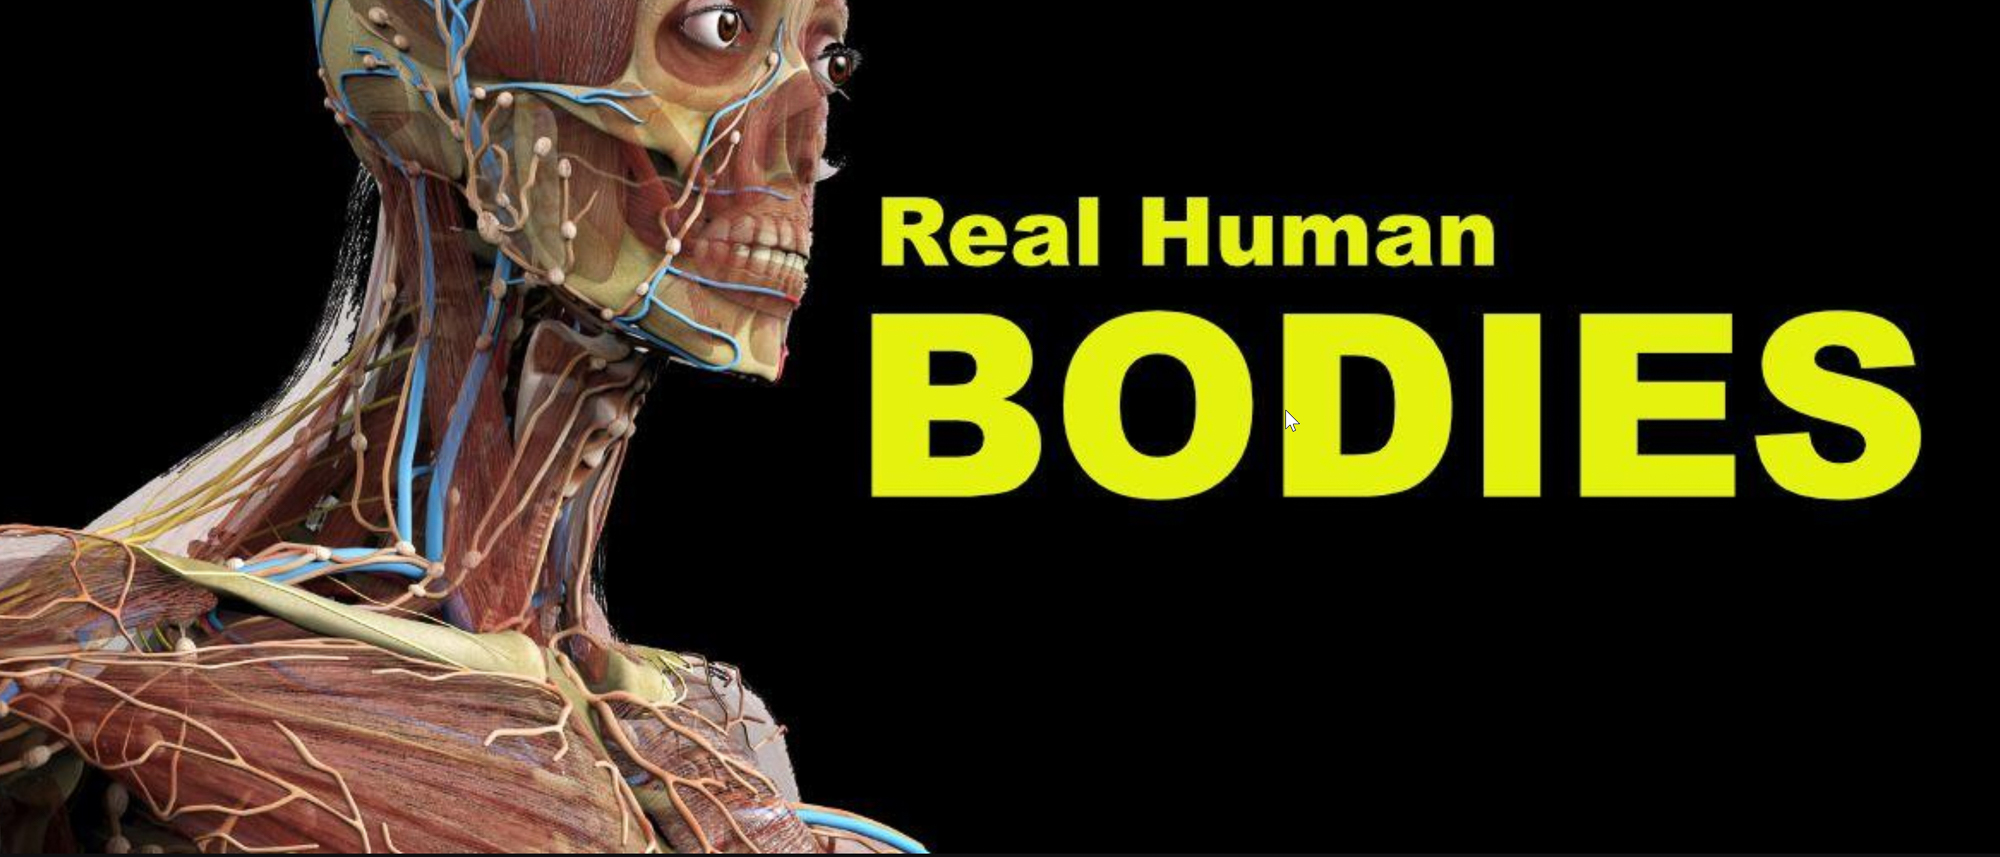 Real Human Bodies